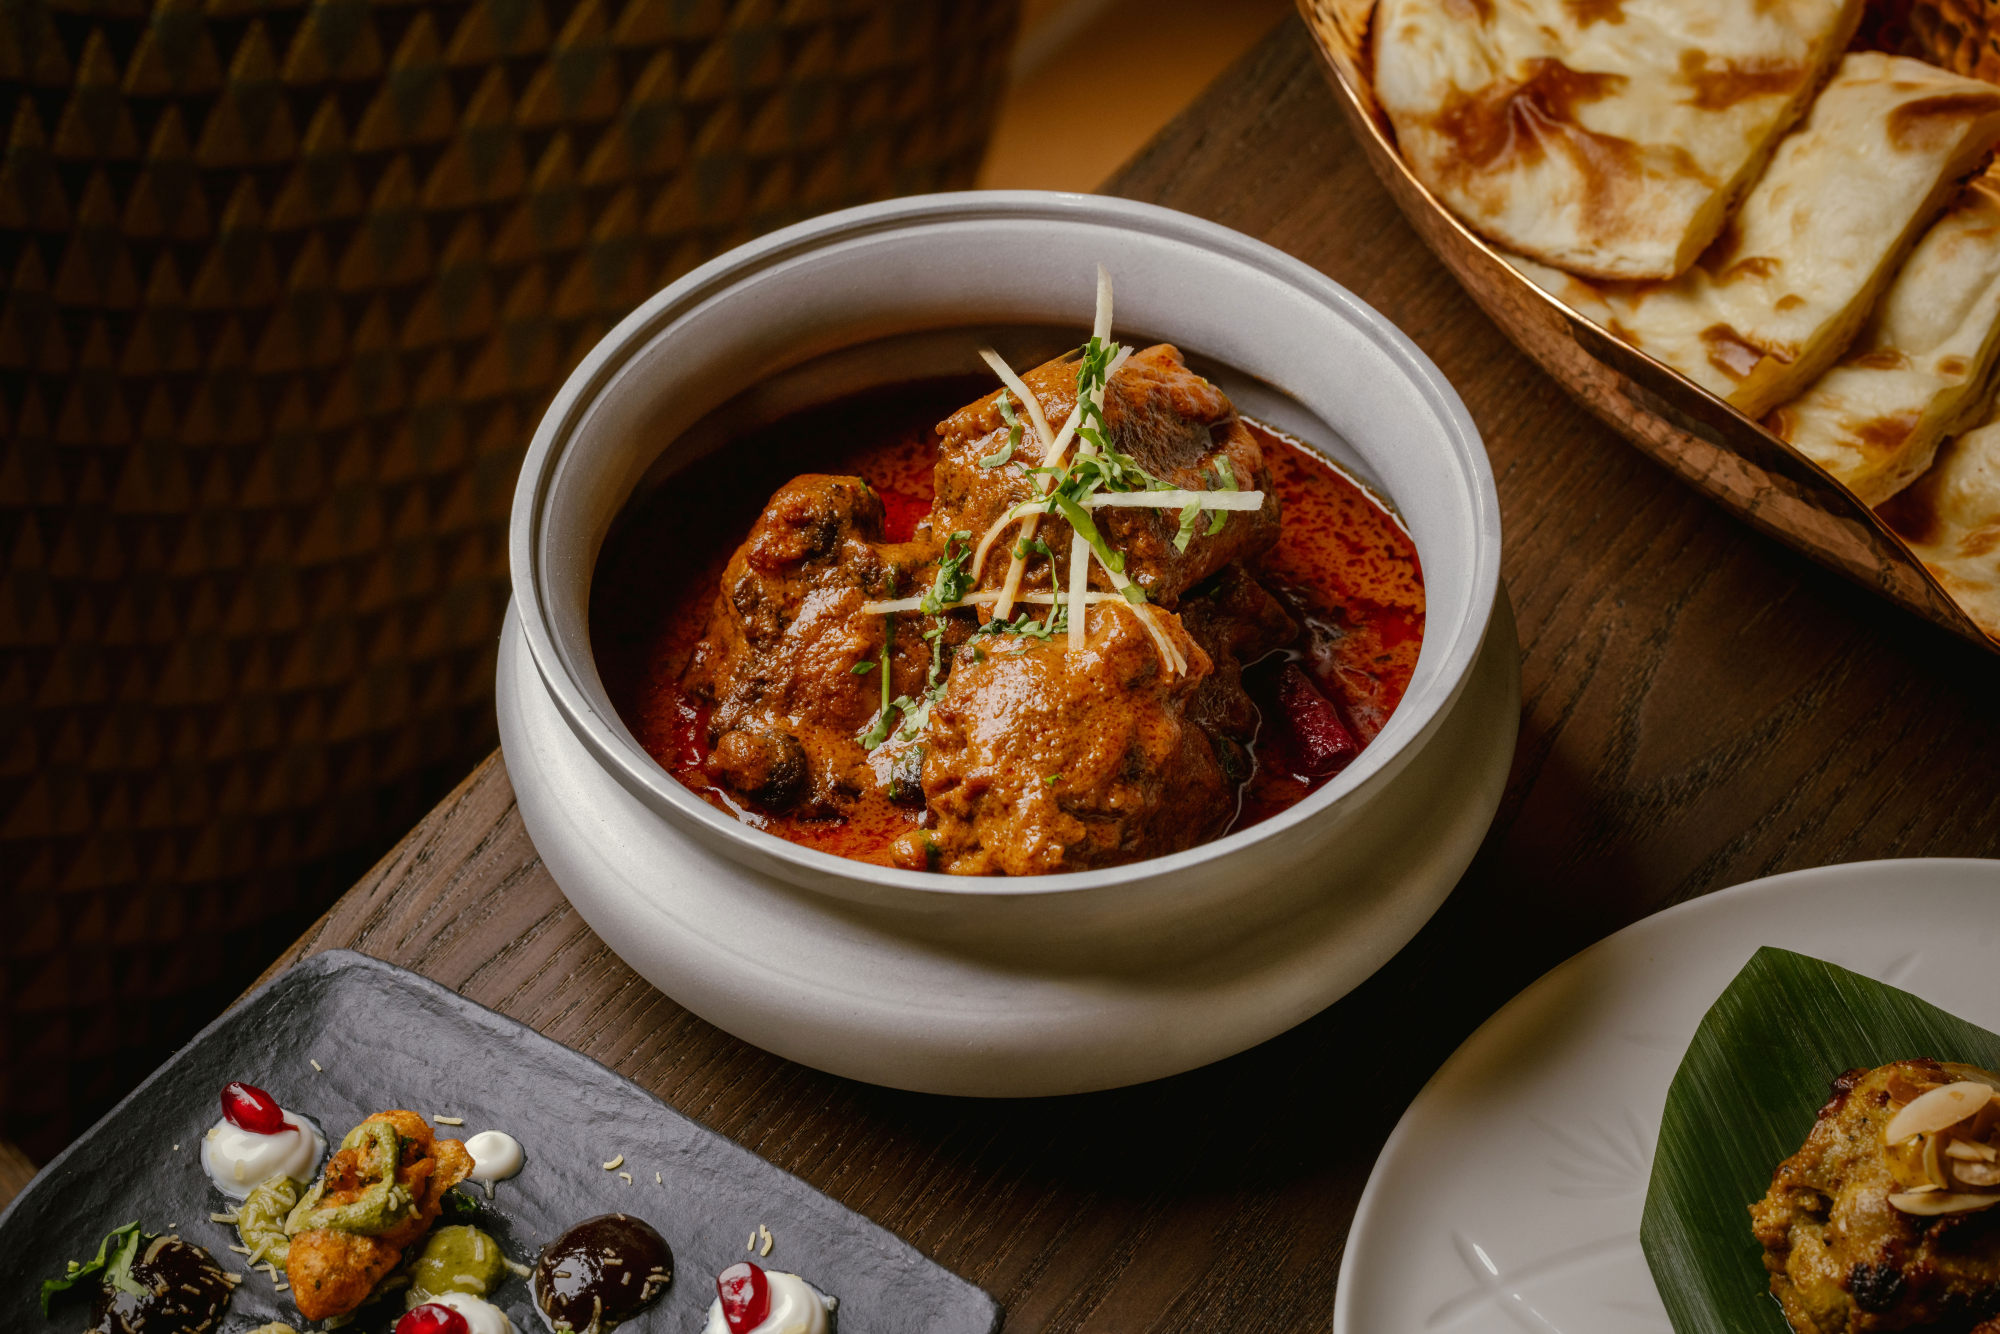 authentic indian dishes that ‘sing the songs of olden times’ in hong kong: ex-chaat chef on how restaurant leela tells a history of india